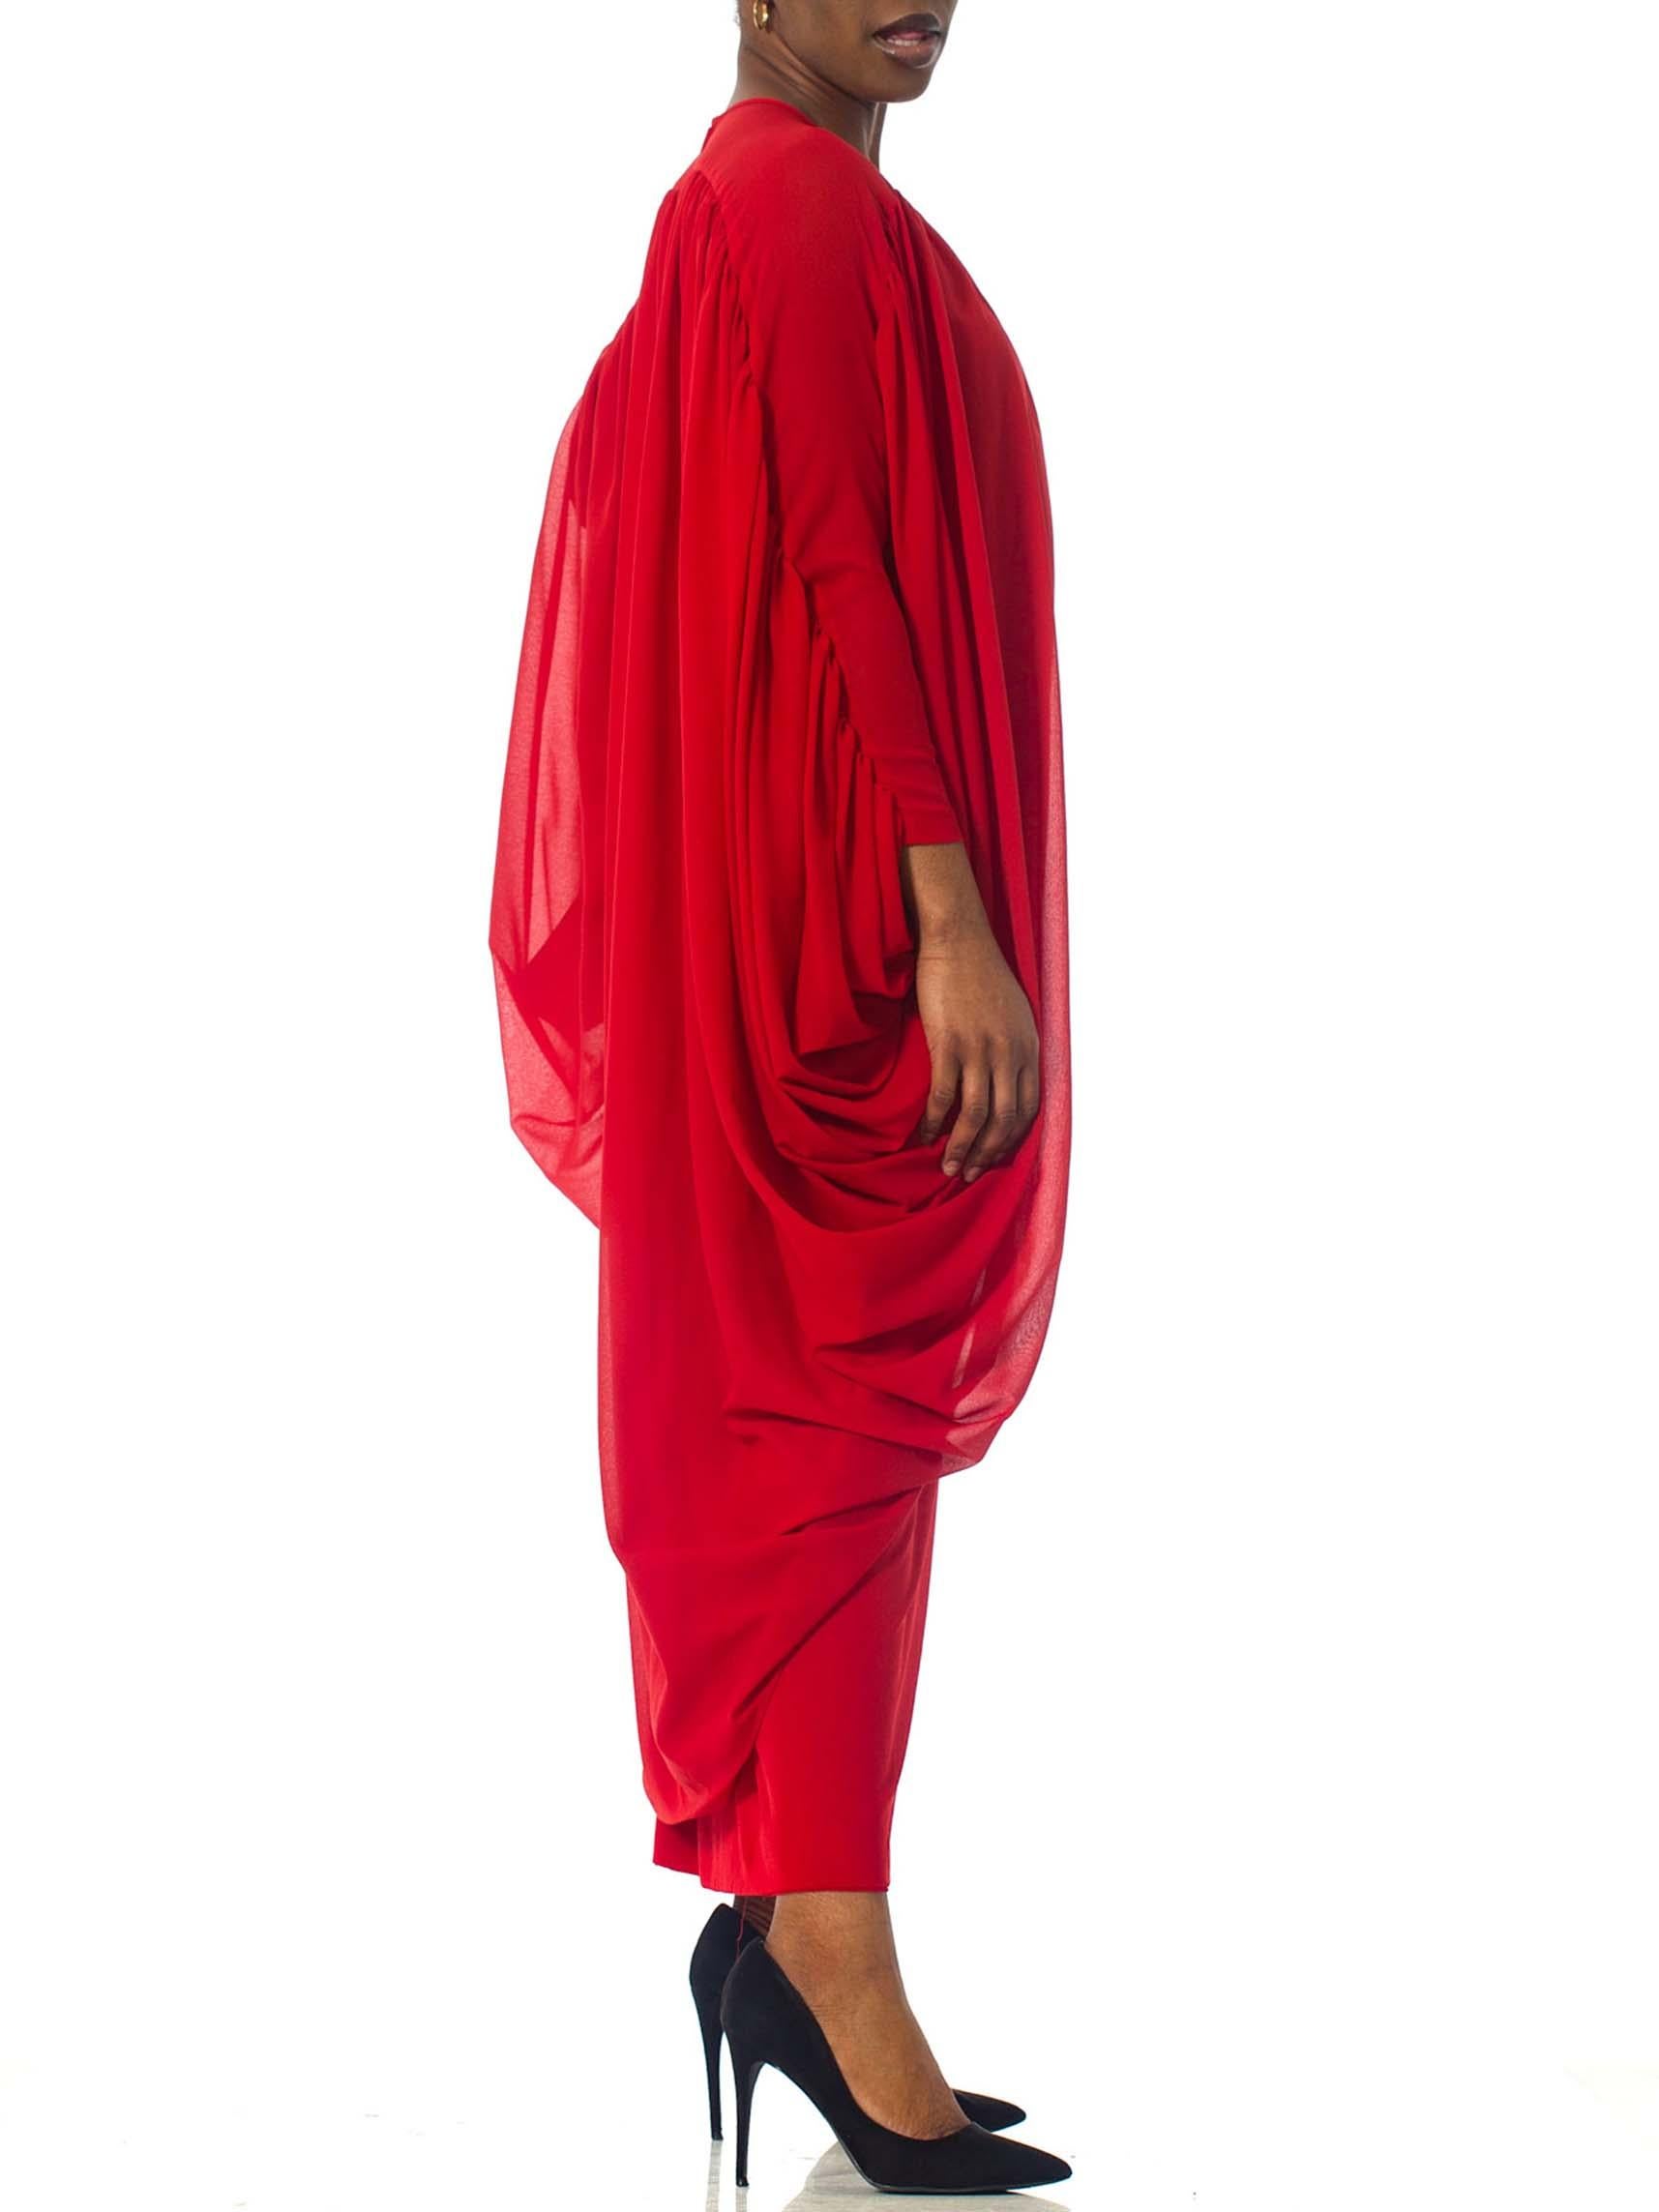 Women's 1980S LANVIN Lipstick Red Polyester Chiffon Giant Draped Sleeve Gown For Sale